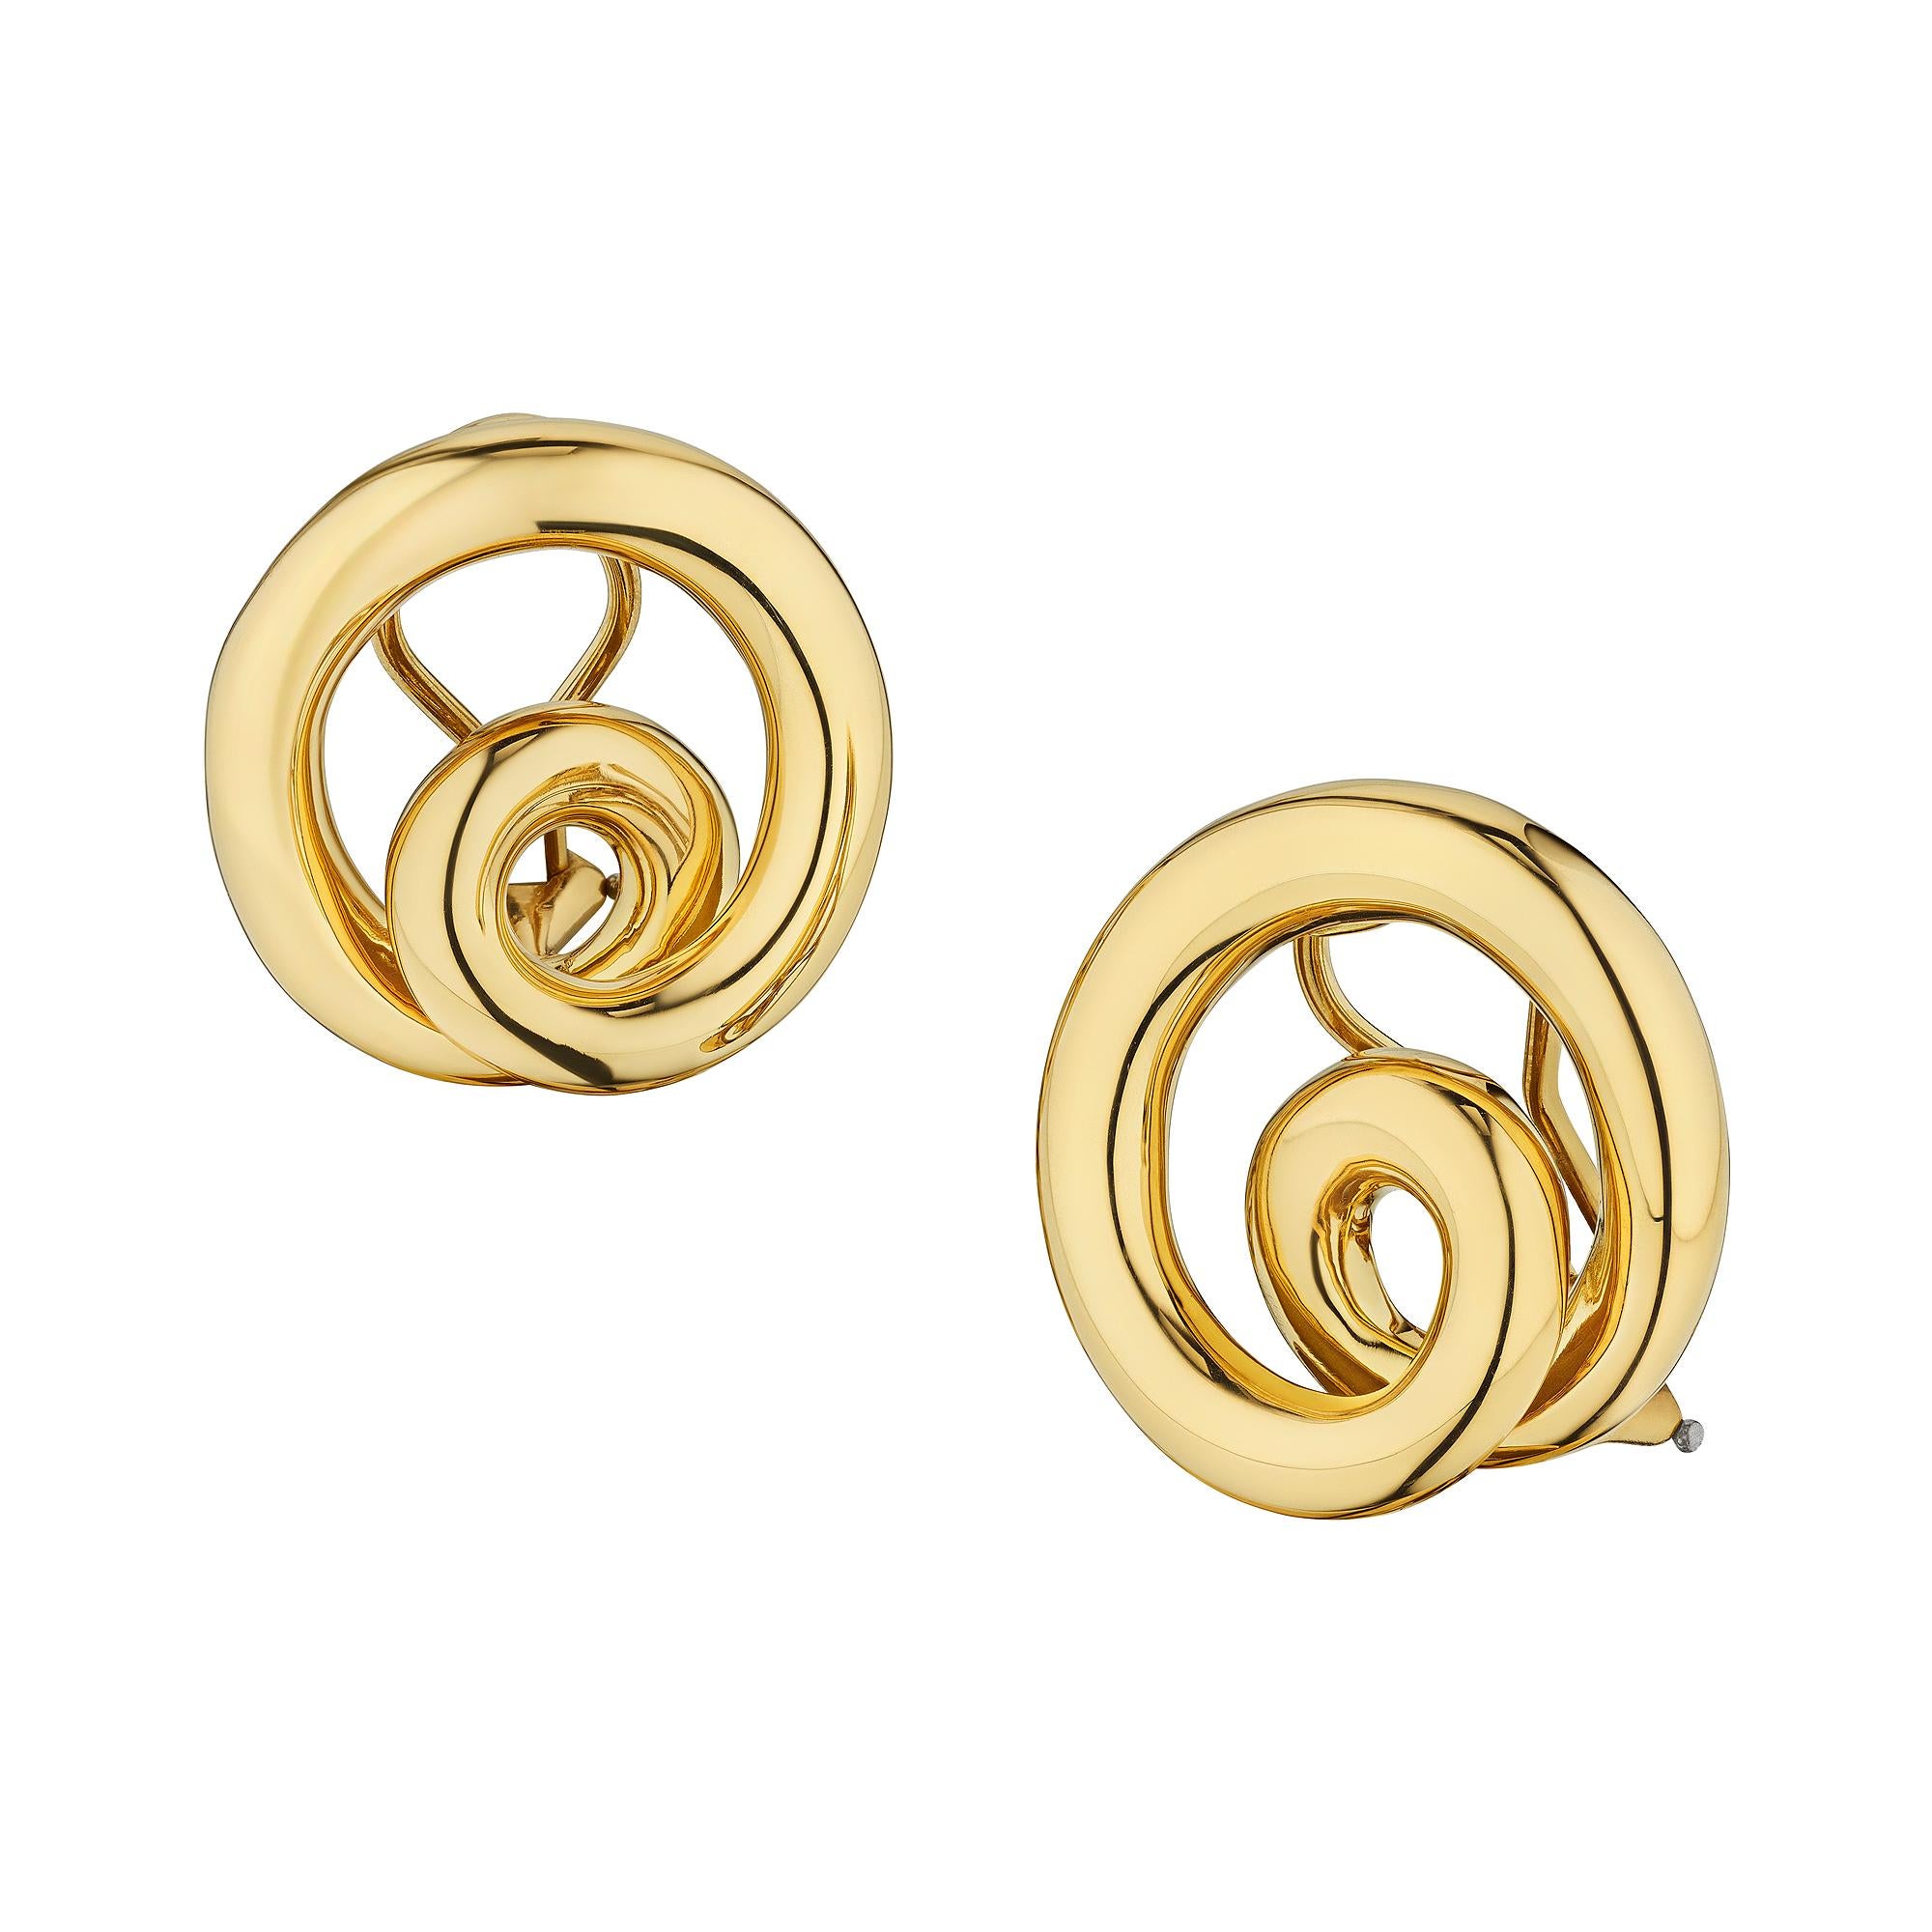 With an up-beat rhythm of their own, these modernist Angela Cummings spiral gold clip earrings will make you want to swirl and twirl..  Signed Cummings.  Circa 1990.  18 karat yellow gold.  1